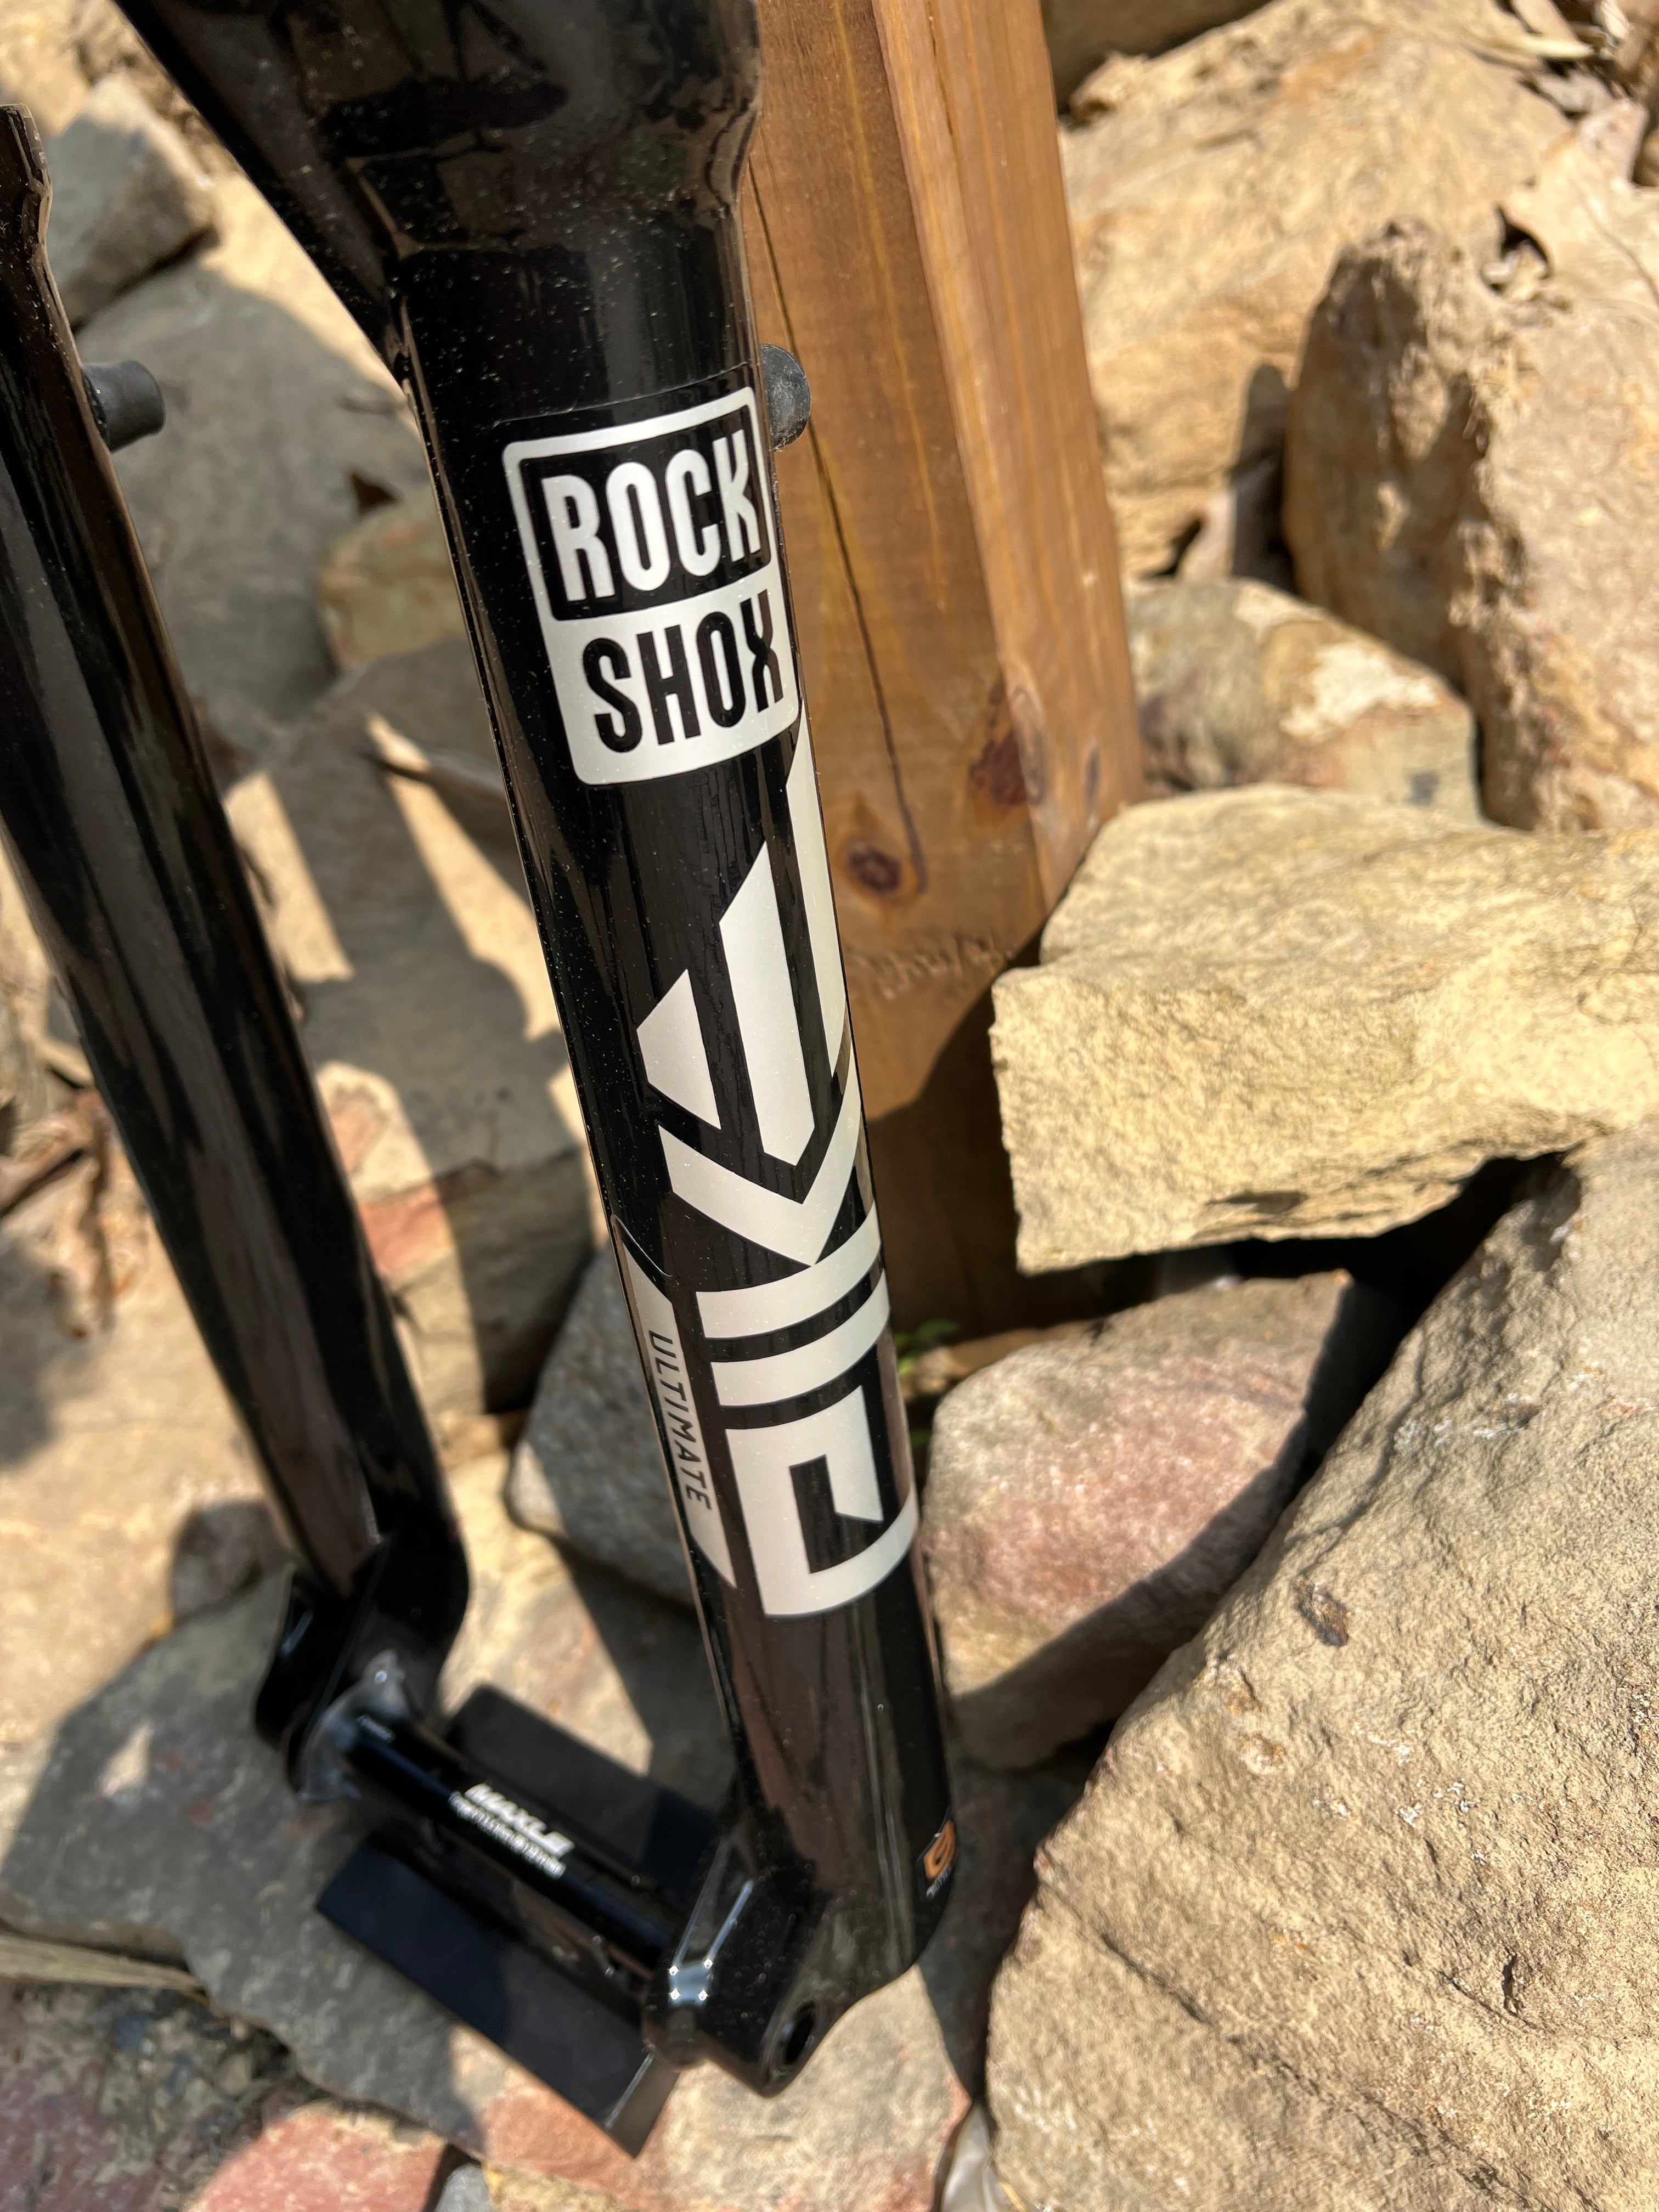 Closeout: The Land of Misfit Forks